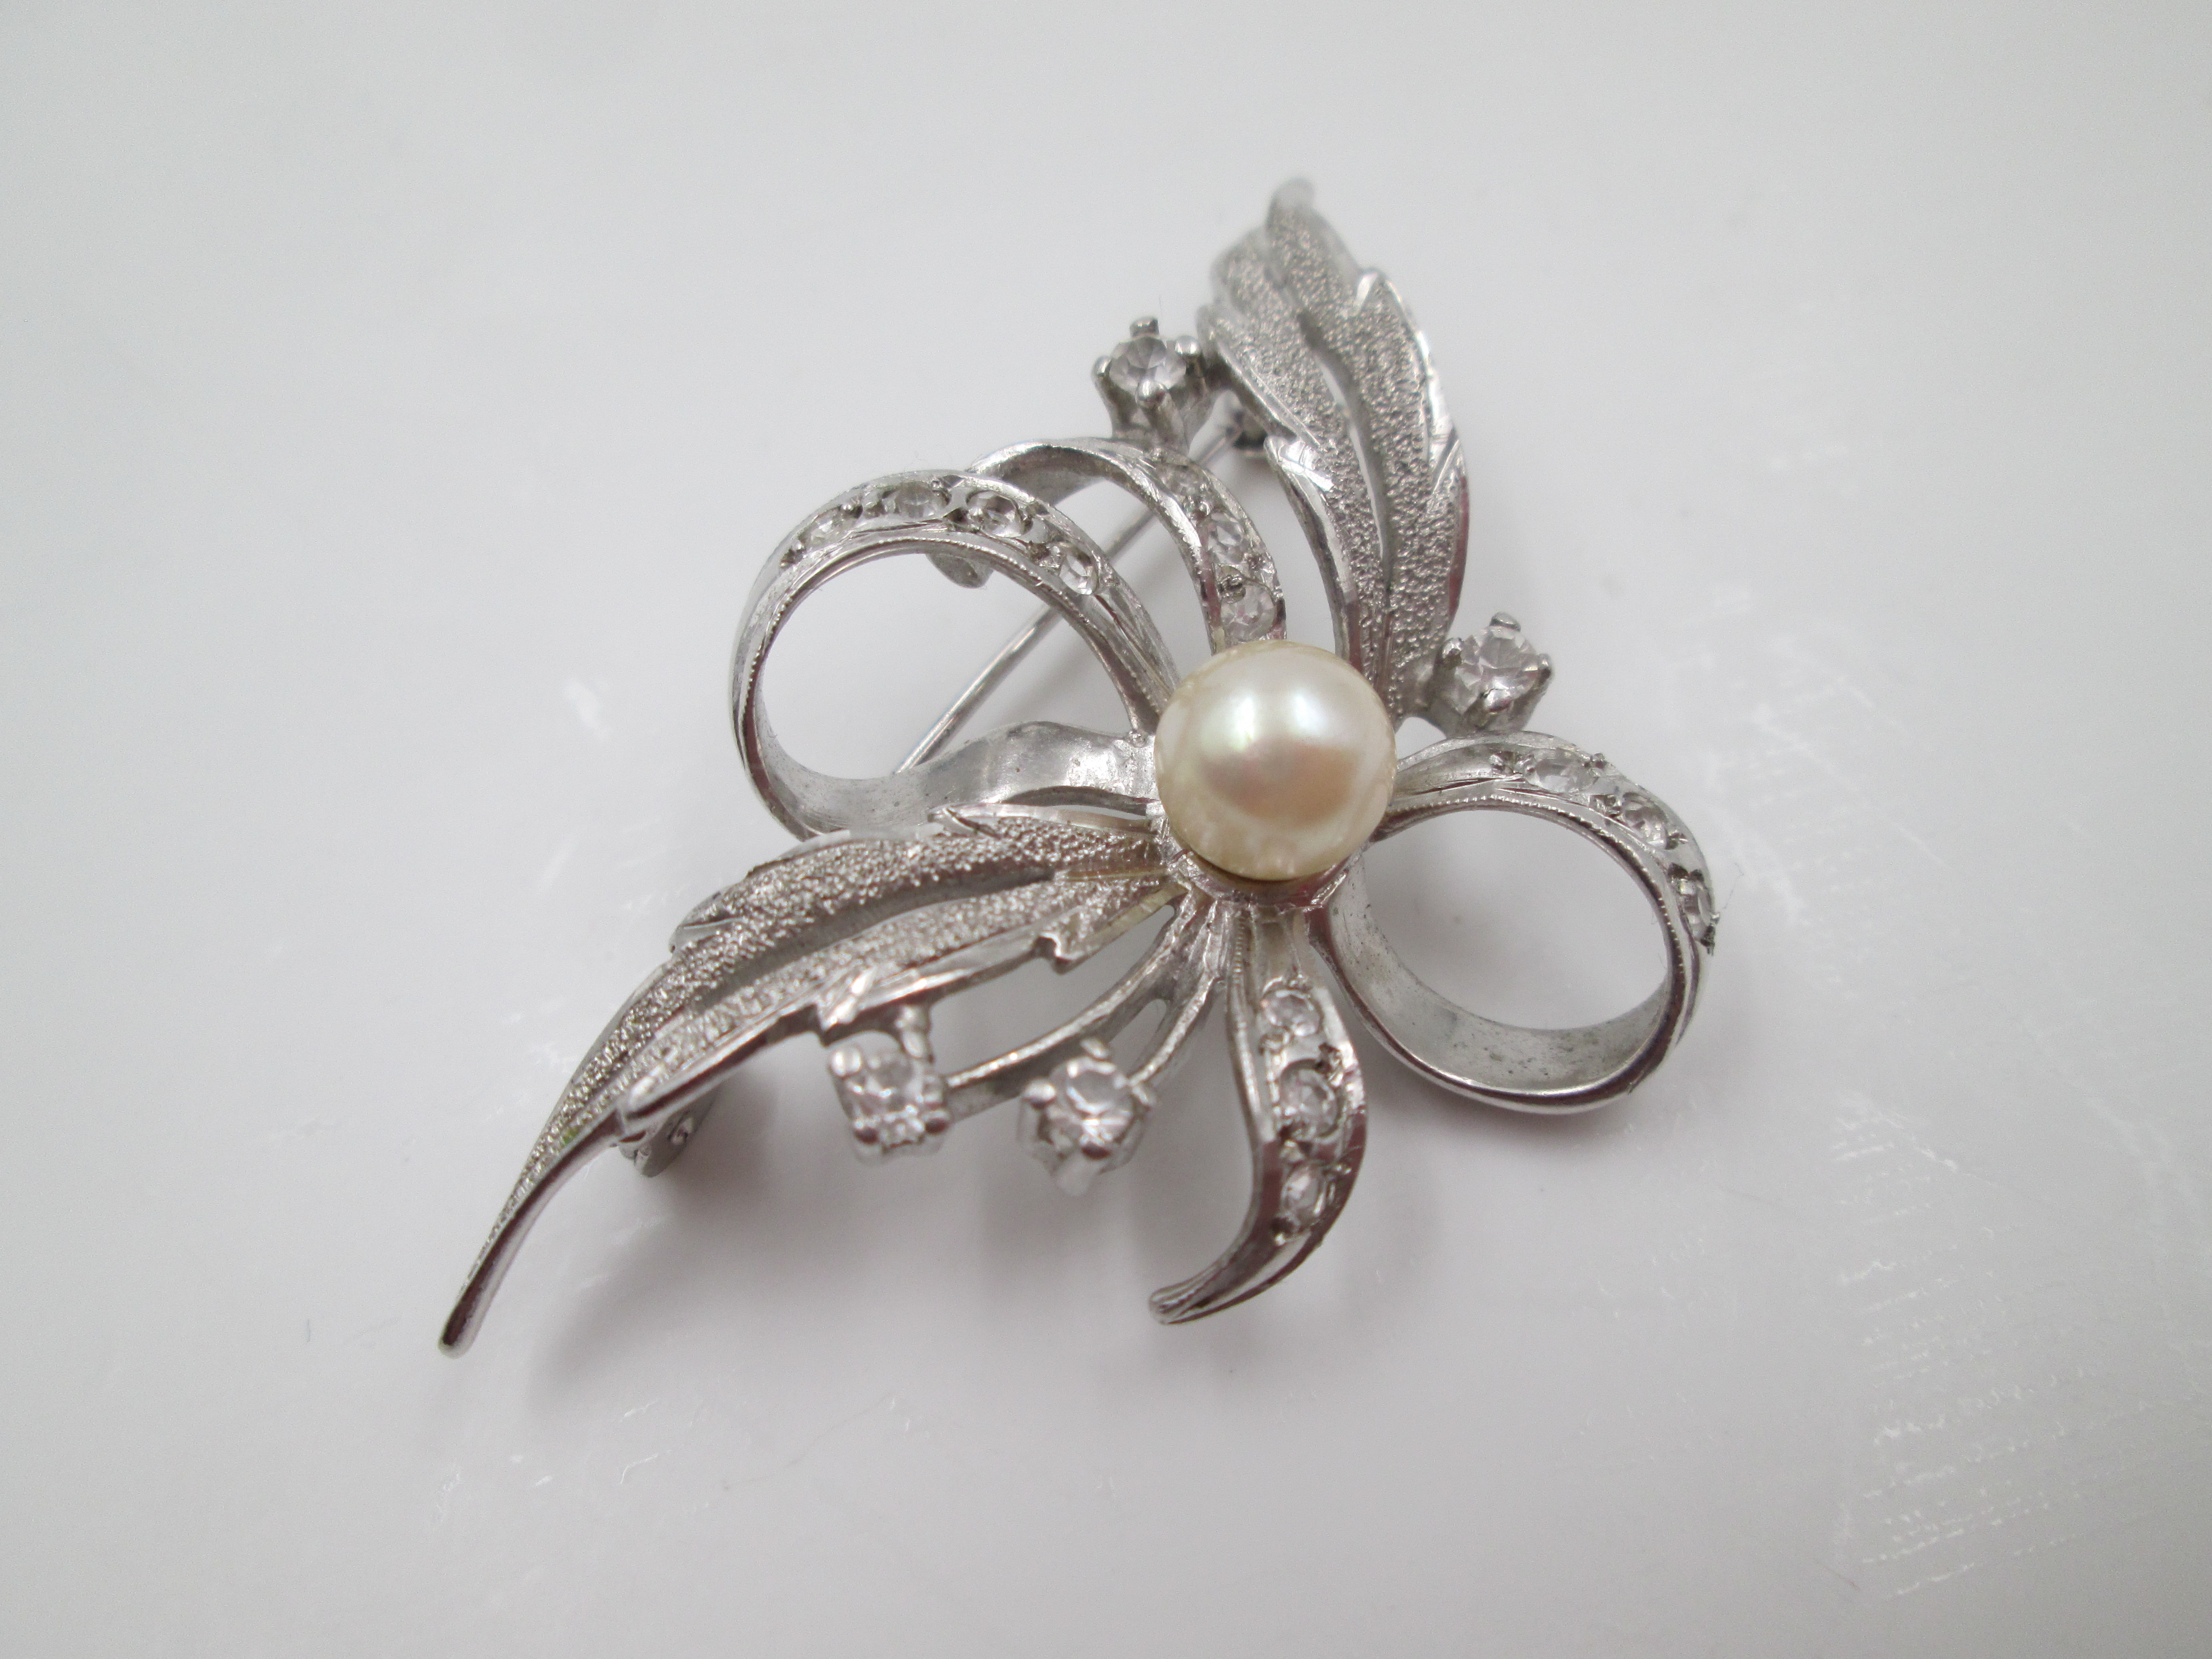 Crystal Flower Brooches for Women 10360-Silver